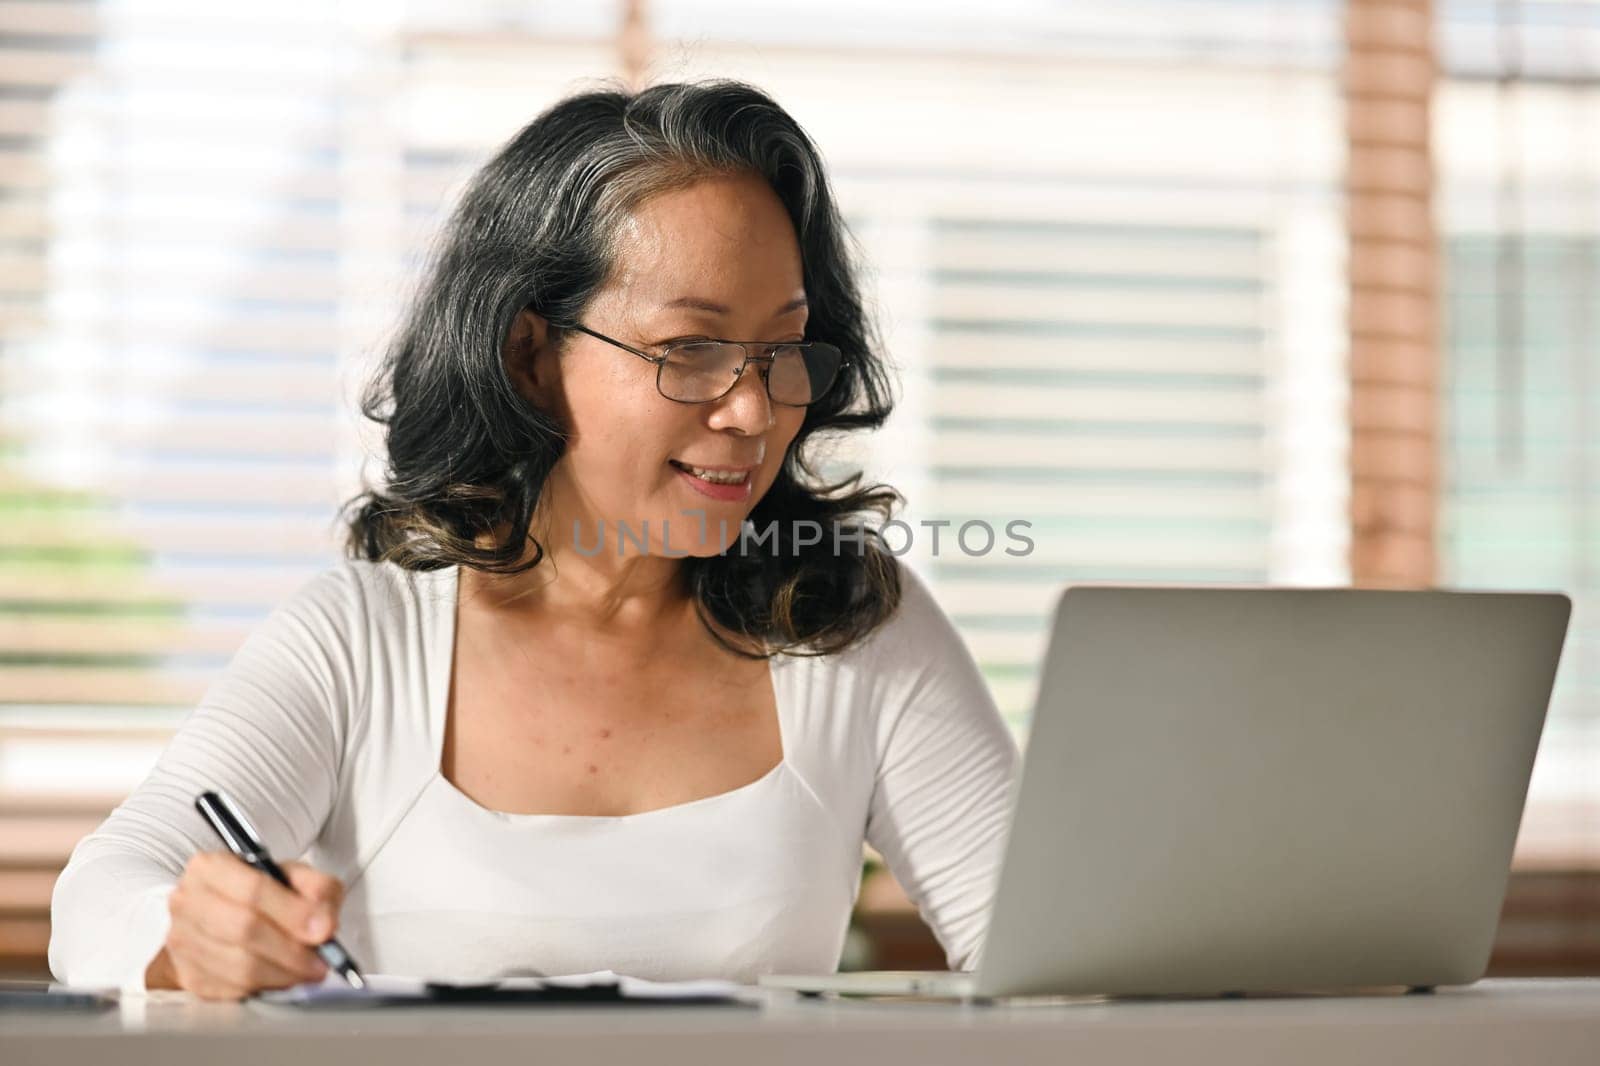 Senior woman reading online news, browsing internet on laptop at home. Retired lifestyle and technology concept.